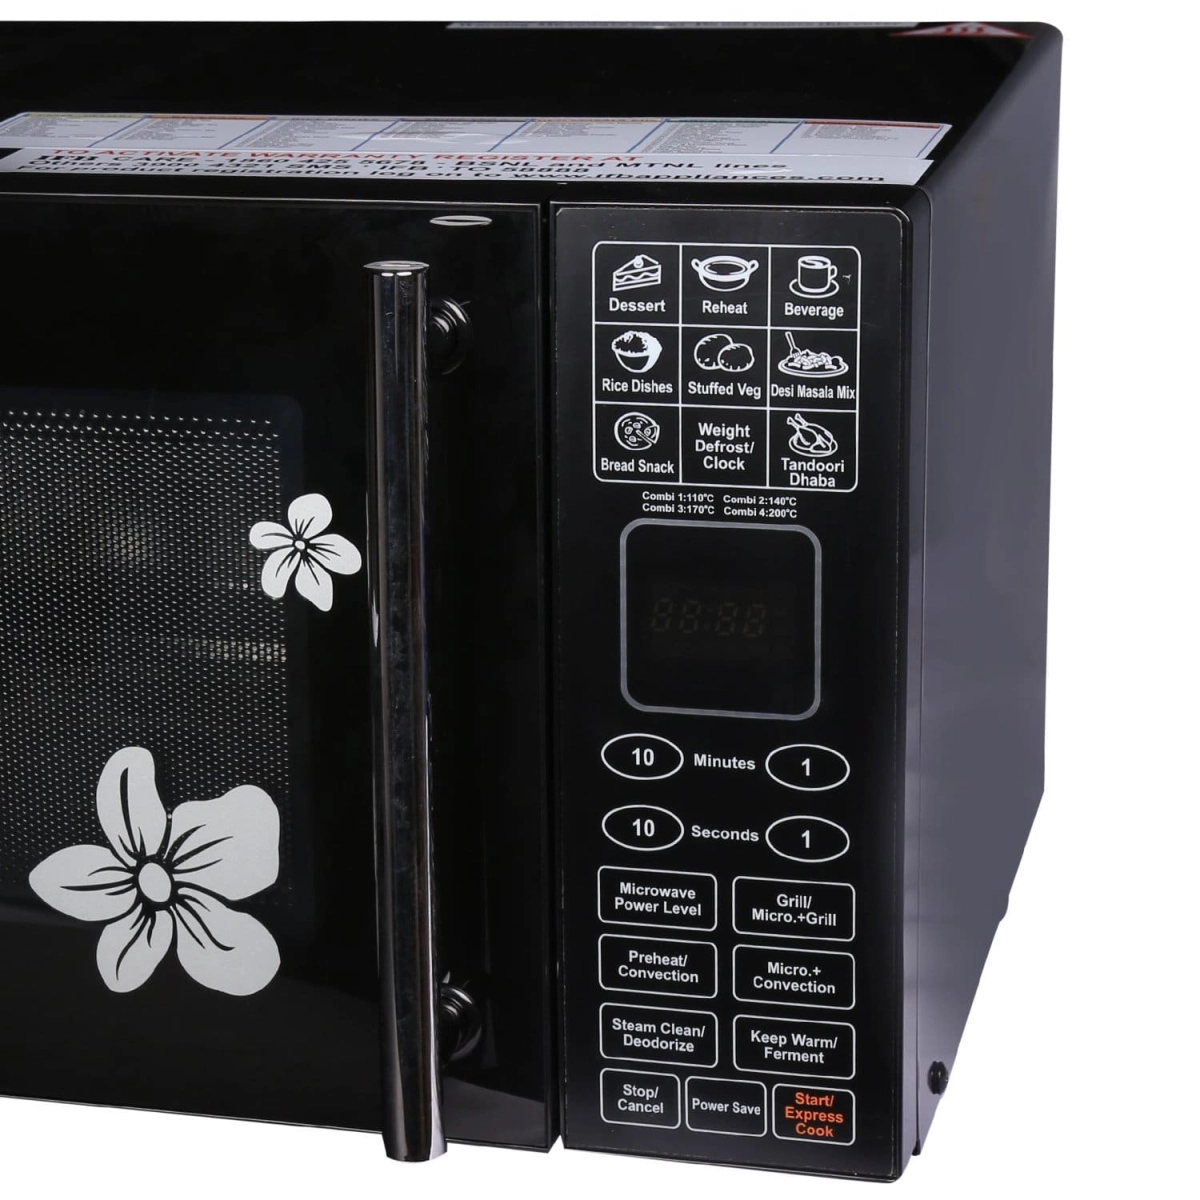 IFB 25 L Convection Microwave Oven - Convection